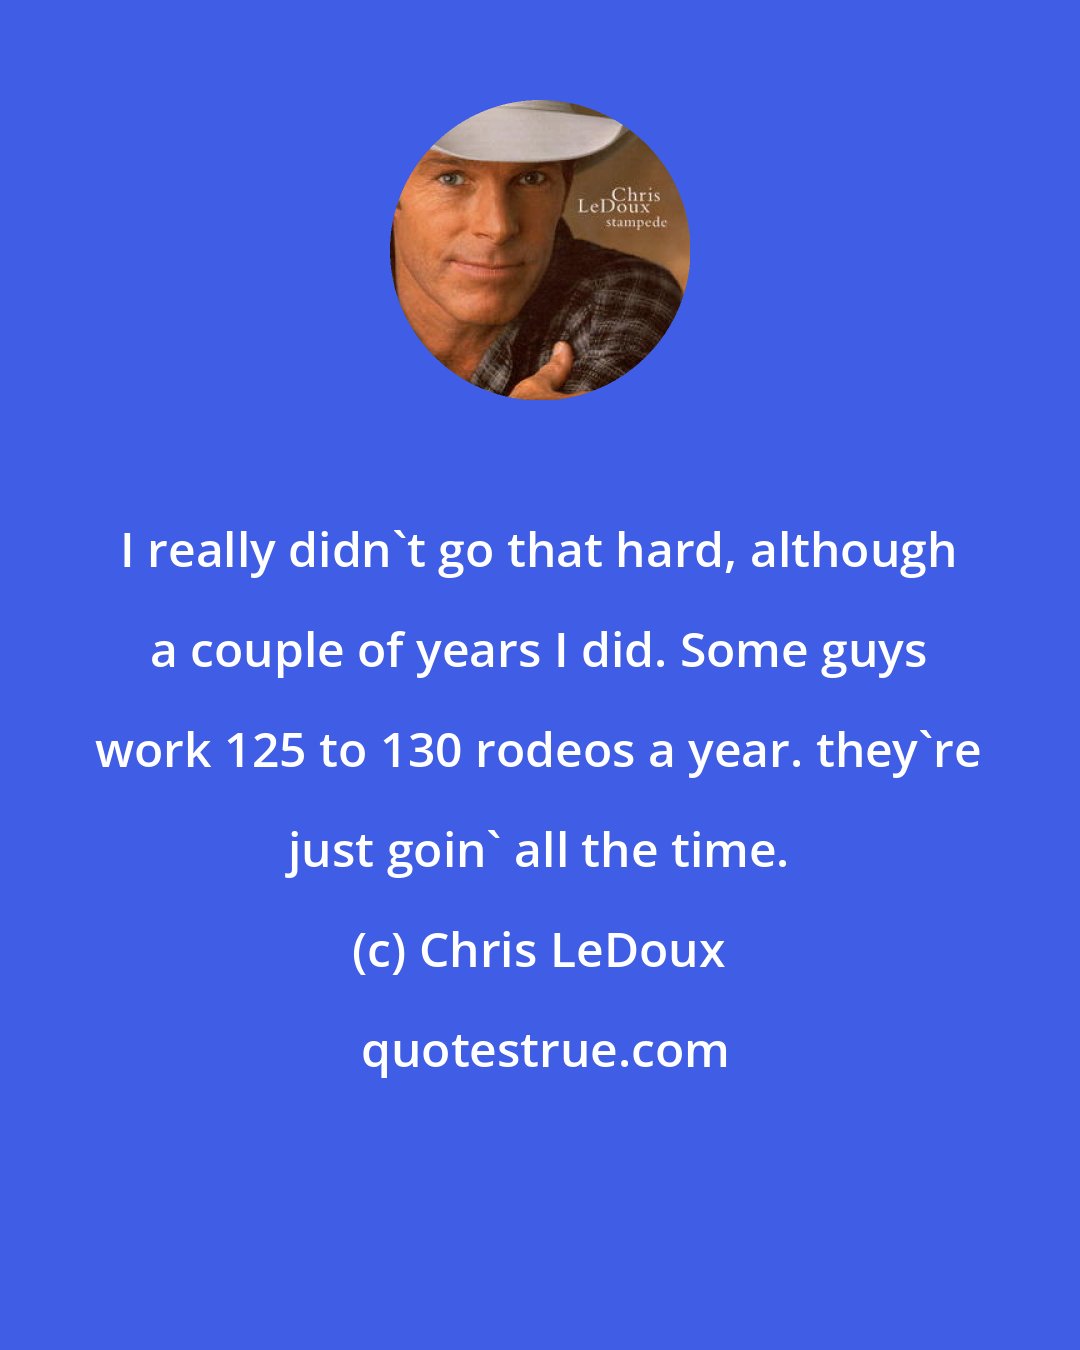 Chris LeDoux: I really didn't go that hard, although a couple of years I did. Some guys work 125 to 130 rodeos a year. they're just goin' all the time.